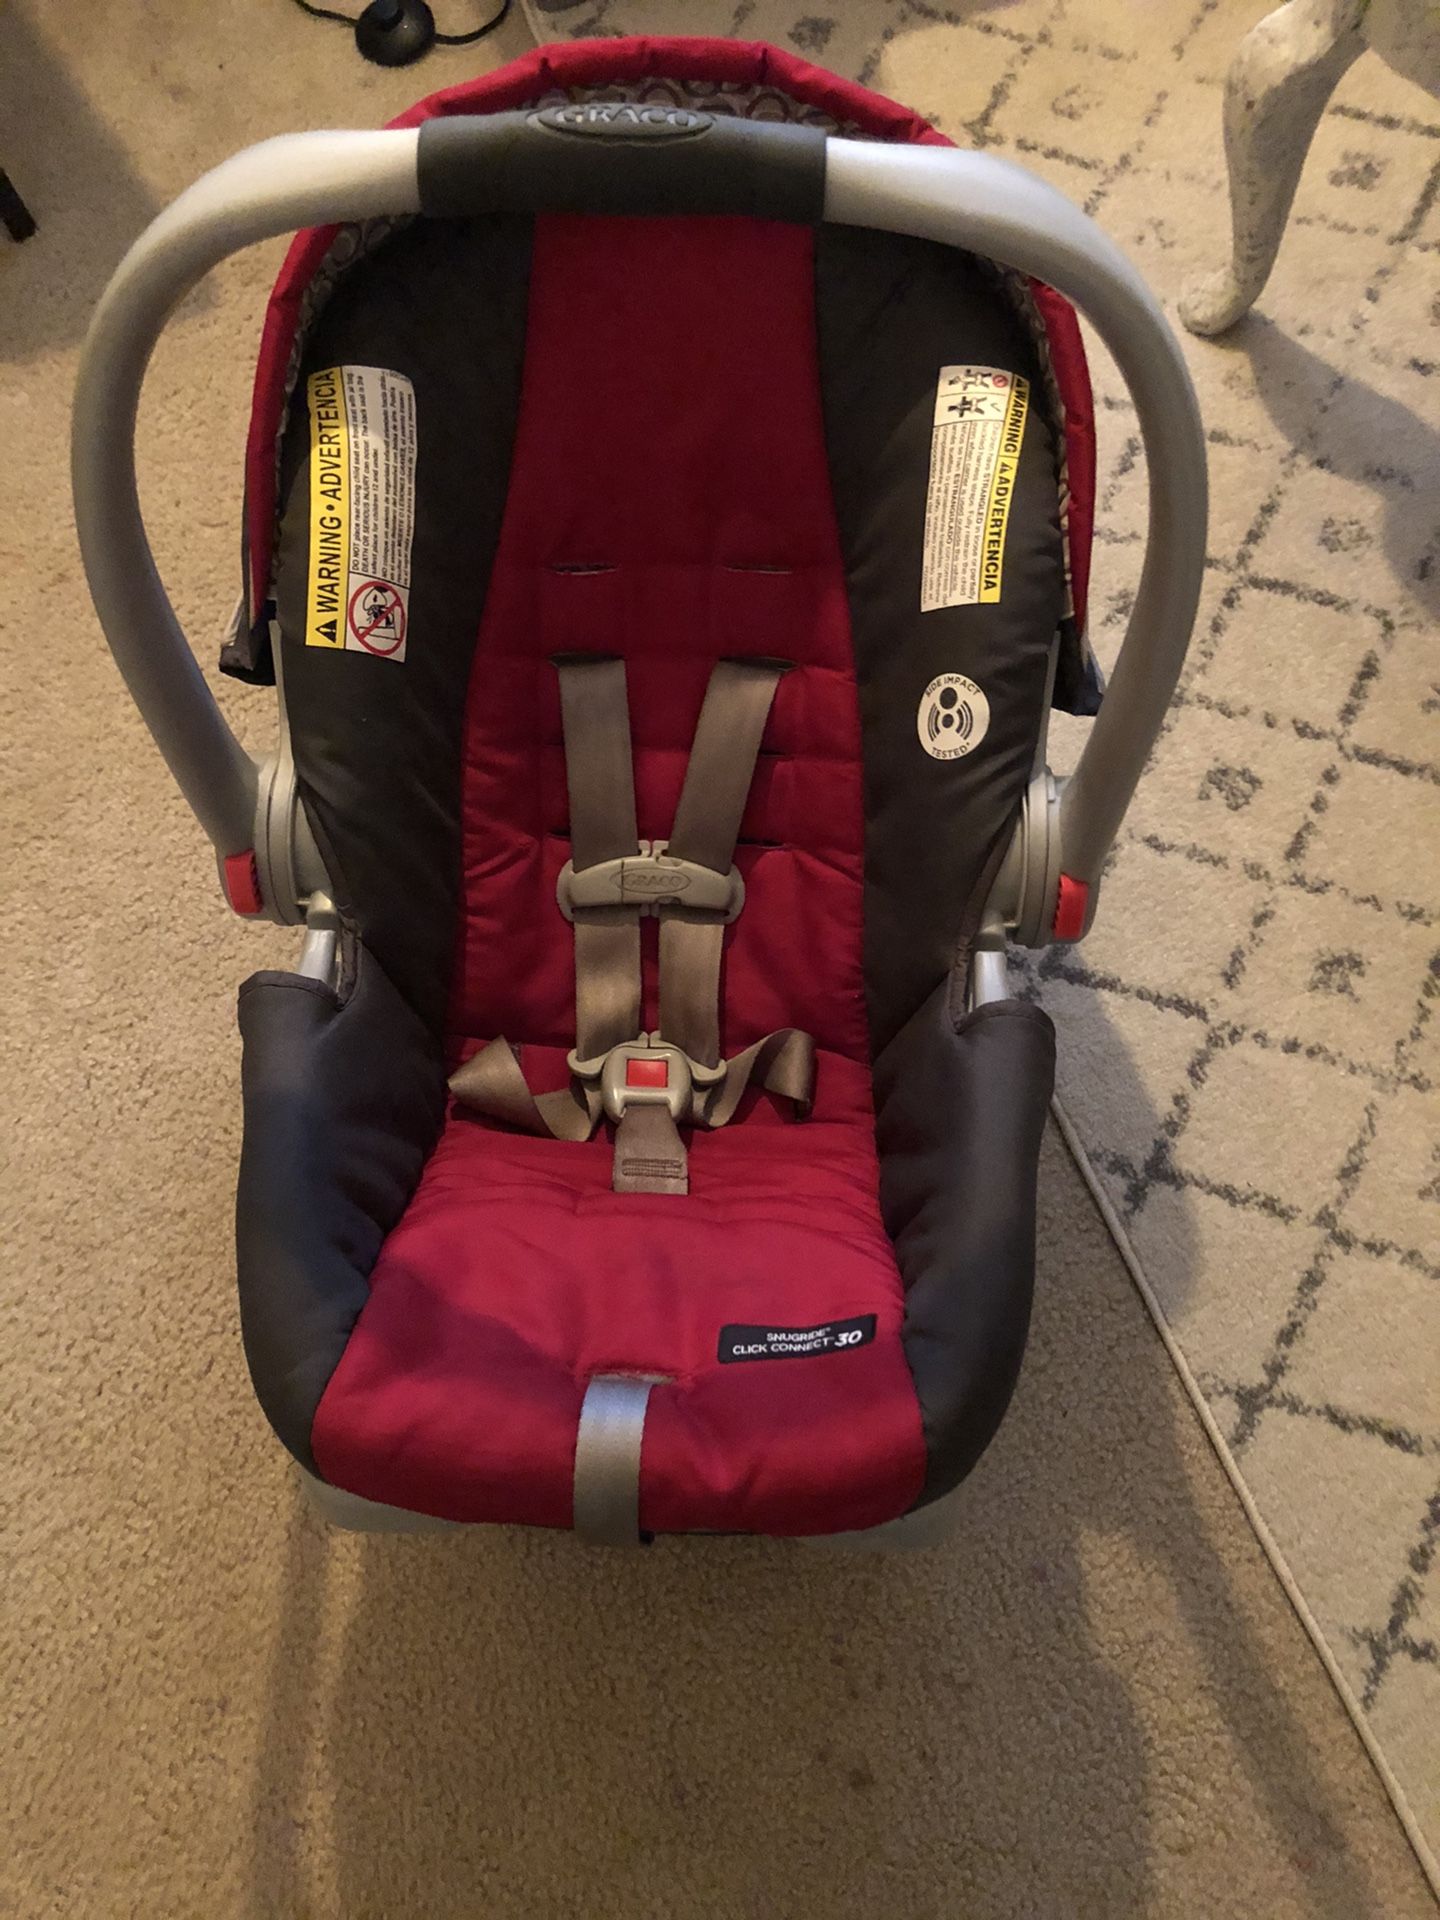 Graco Infant Car Seat with Base and stroller